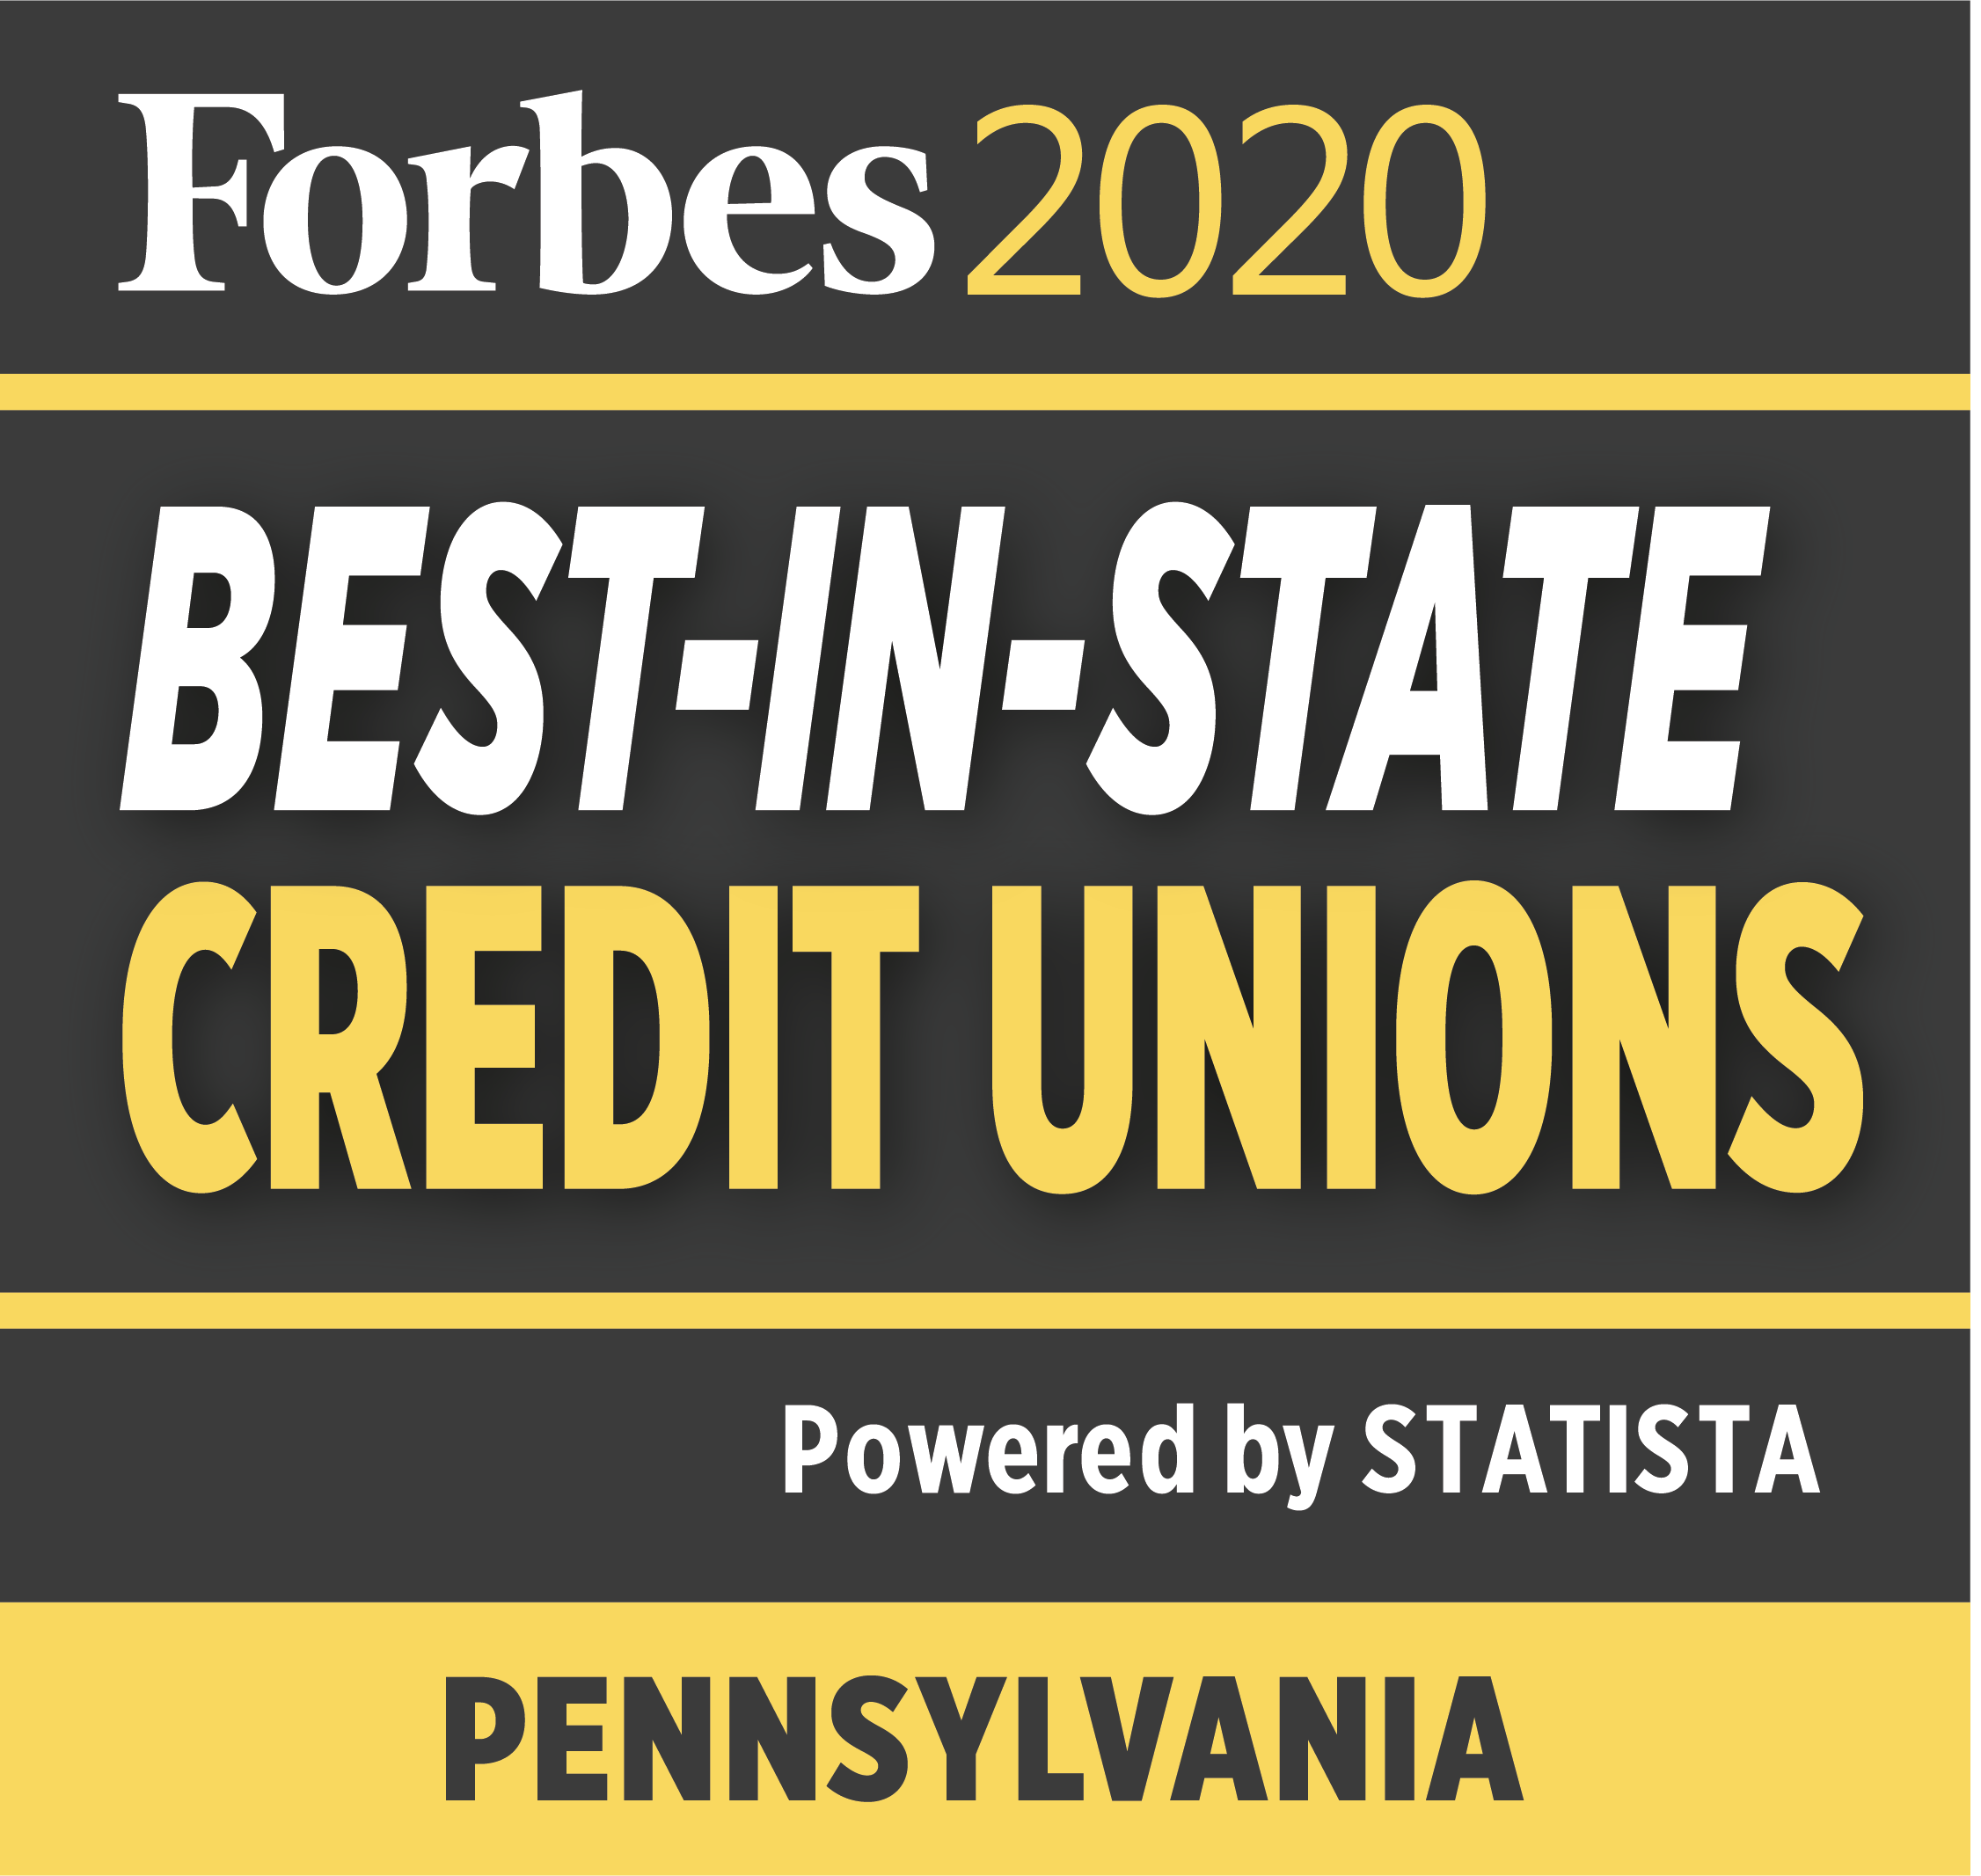 Pennsylvania’s anytime, anywhere digital credit union, PSECU, 
was named a Forbes Best-In-State Credit Union for second consecutive year.